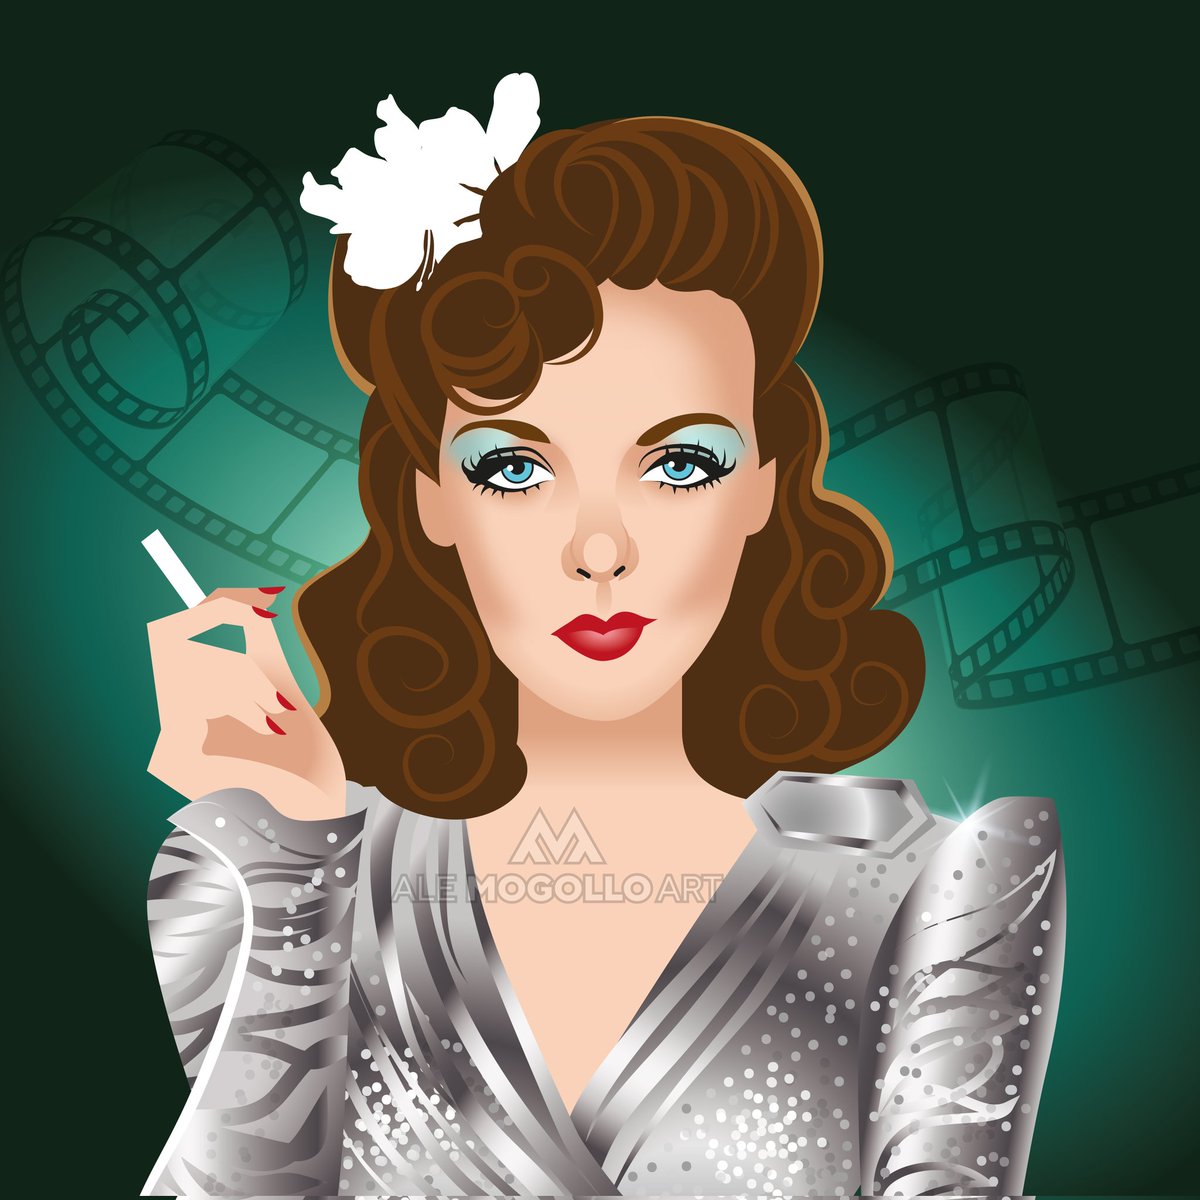 Celebrating the birthday of the pioneering Ida Lupino, actress, singer and producer, she was a leading lady during the 40’s and later she went on to become one of the only female directors in Hollywood. She was a true trailblazer.
#idalupino #trailblazers #pioneer #wonendirectors